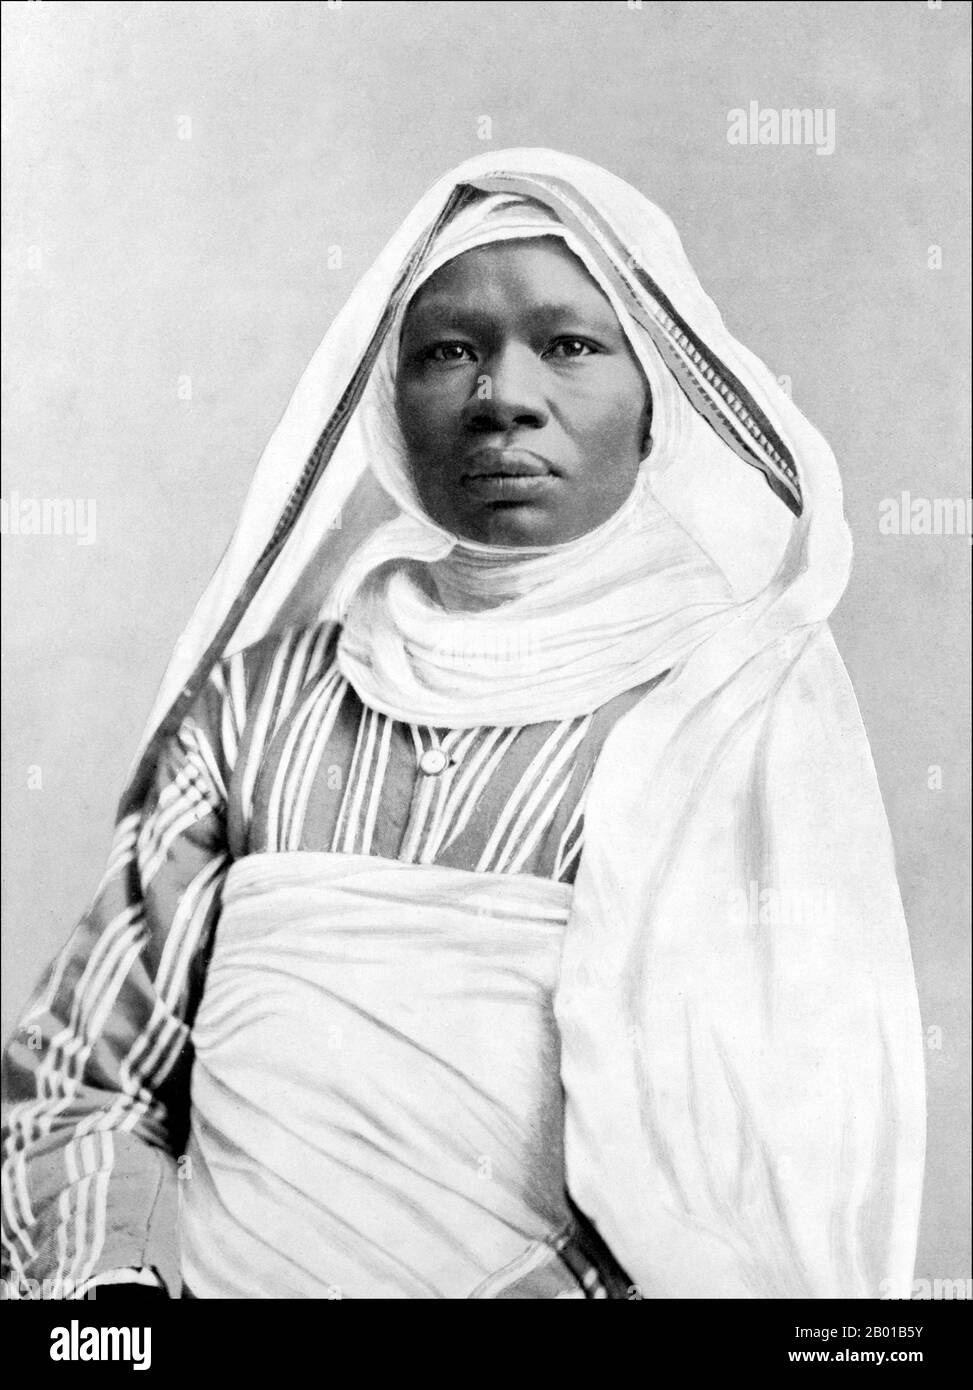 Sudan/USA: Mahbouba Um Zanuba, a forty-year-old woman from the Sudan, at the 1893 Chicago World's Fair.  The World Columbian Exposition was held from May to October 1893 in Chicago in honor of the 400th anniversary of Columbus’ discovery of the new world. The Exposition was built on 630 acres in and around Jackson Park. It was a spectacular display of progress and prosperity, and included among its many wonders electrical exhibits, exhibits from other countries and a popular amusement area on Midway Plaisance. Stock Photo